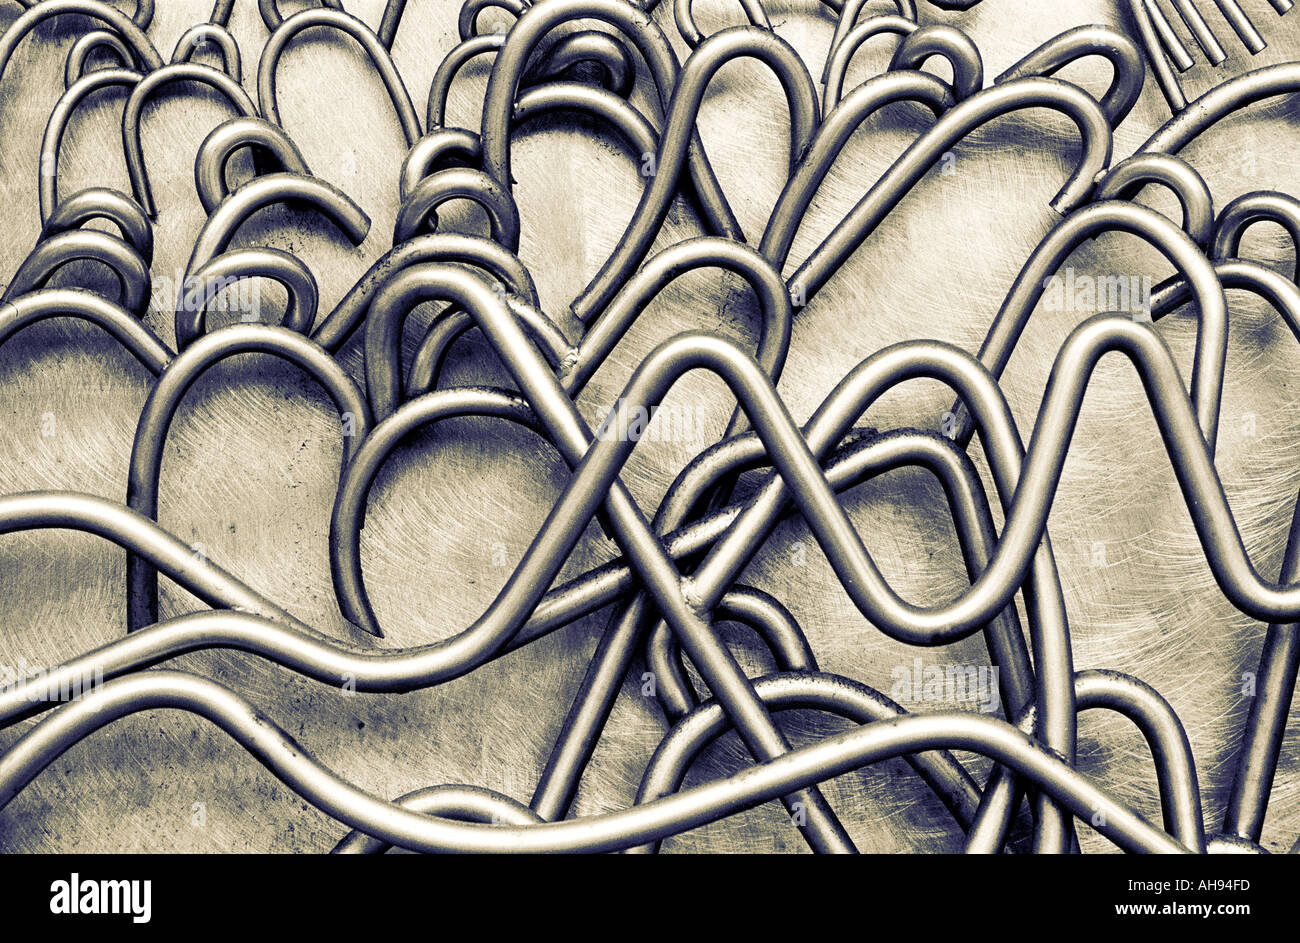 Twisted and curved carved metal tubing like cables on reflective metal surface Stock Photo